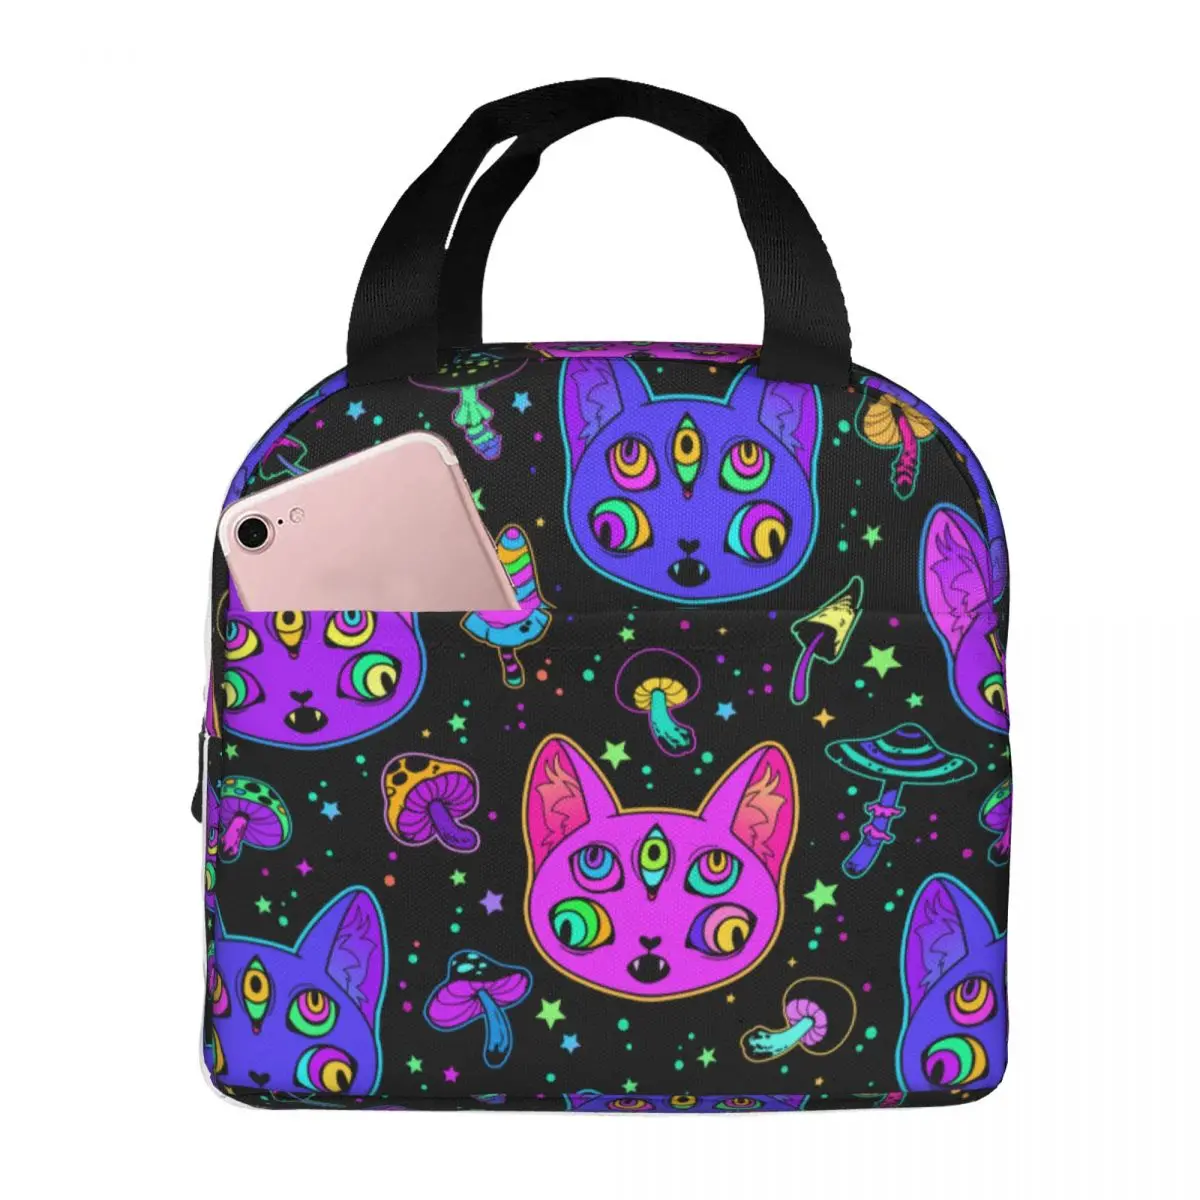 Psychedelic Cat Lunch Bags Waterproof Insulated Oxford Cooler Bags Thermal Cold Food School Lunch Box for Women Girl